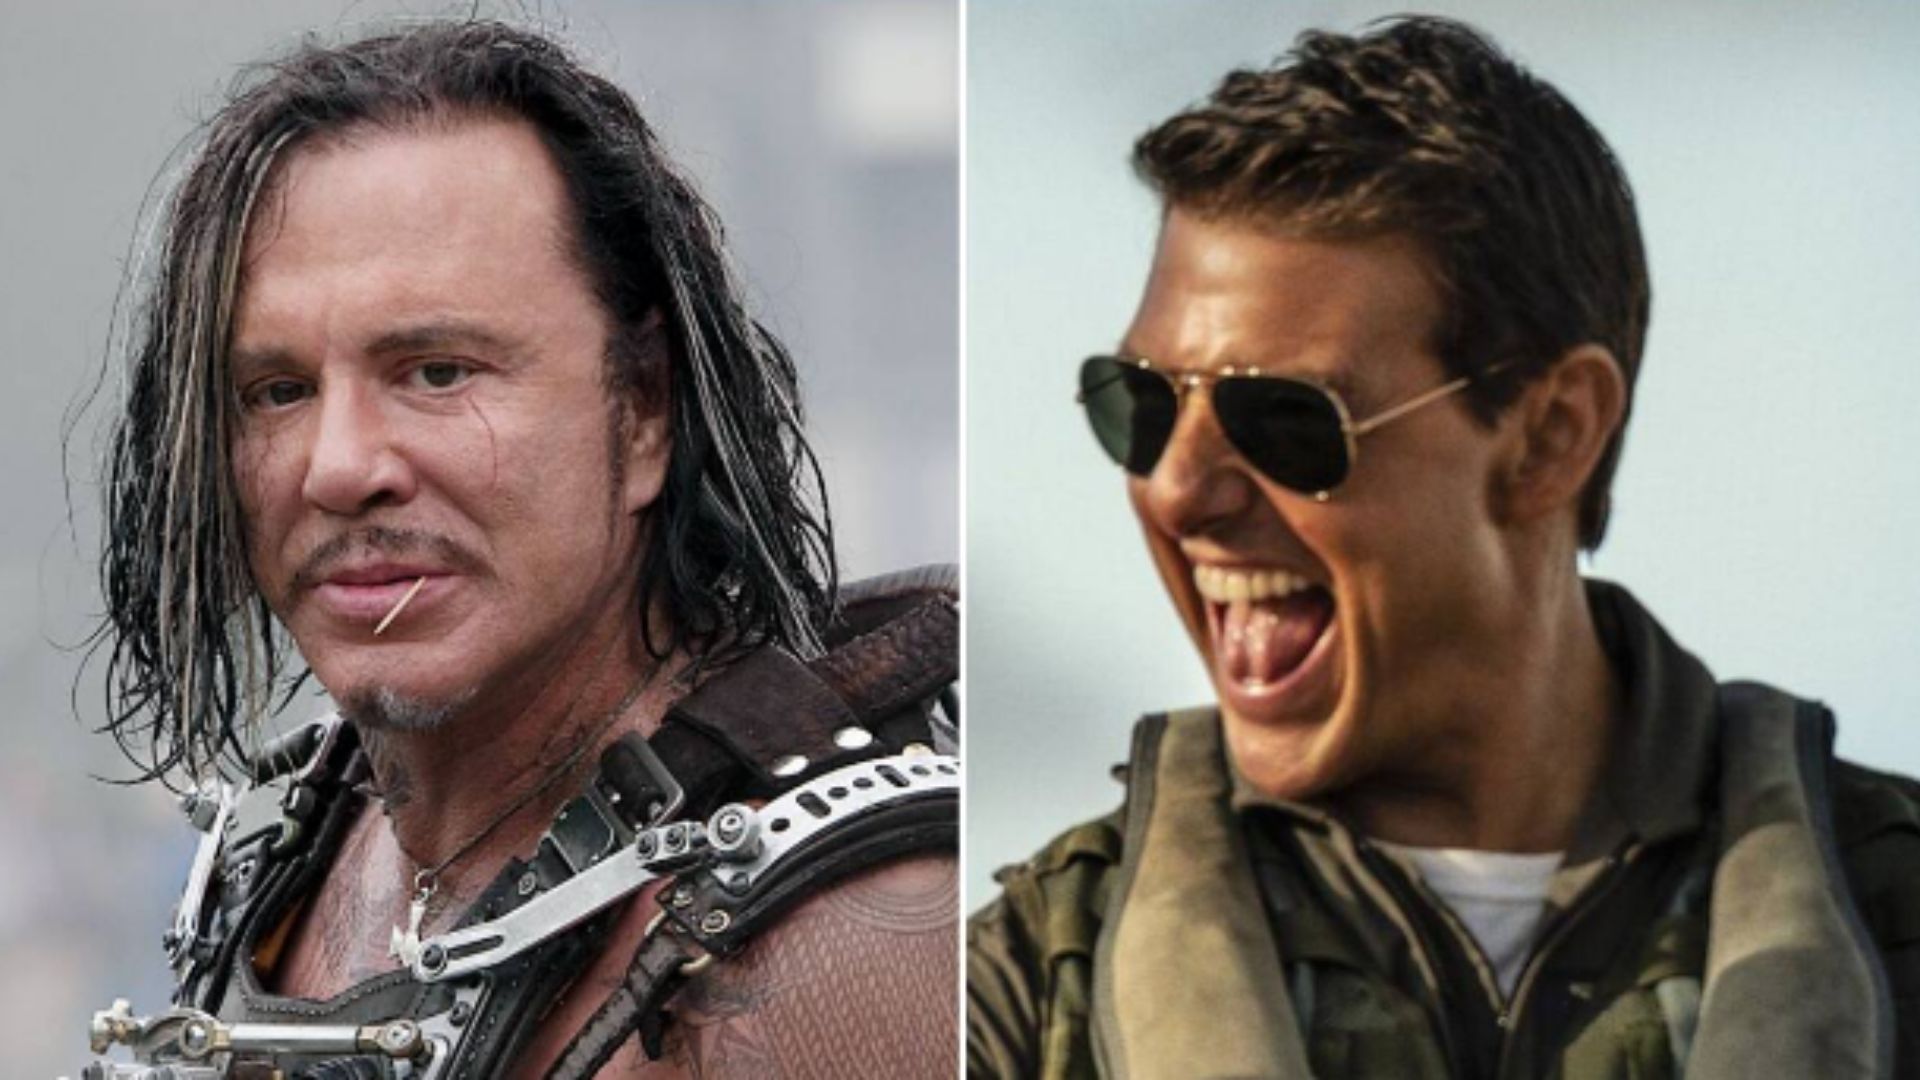 Mickey Rourke calls Tom Cruise unessential